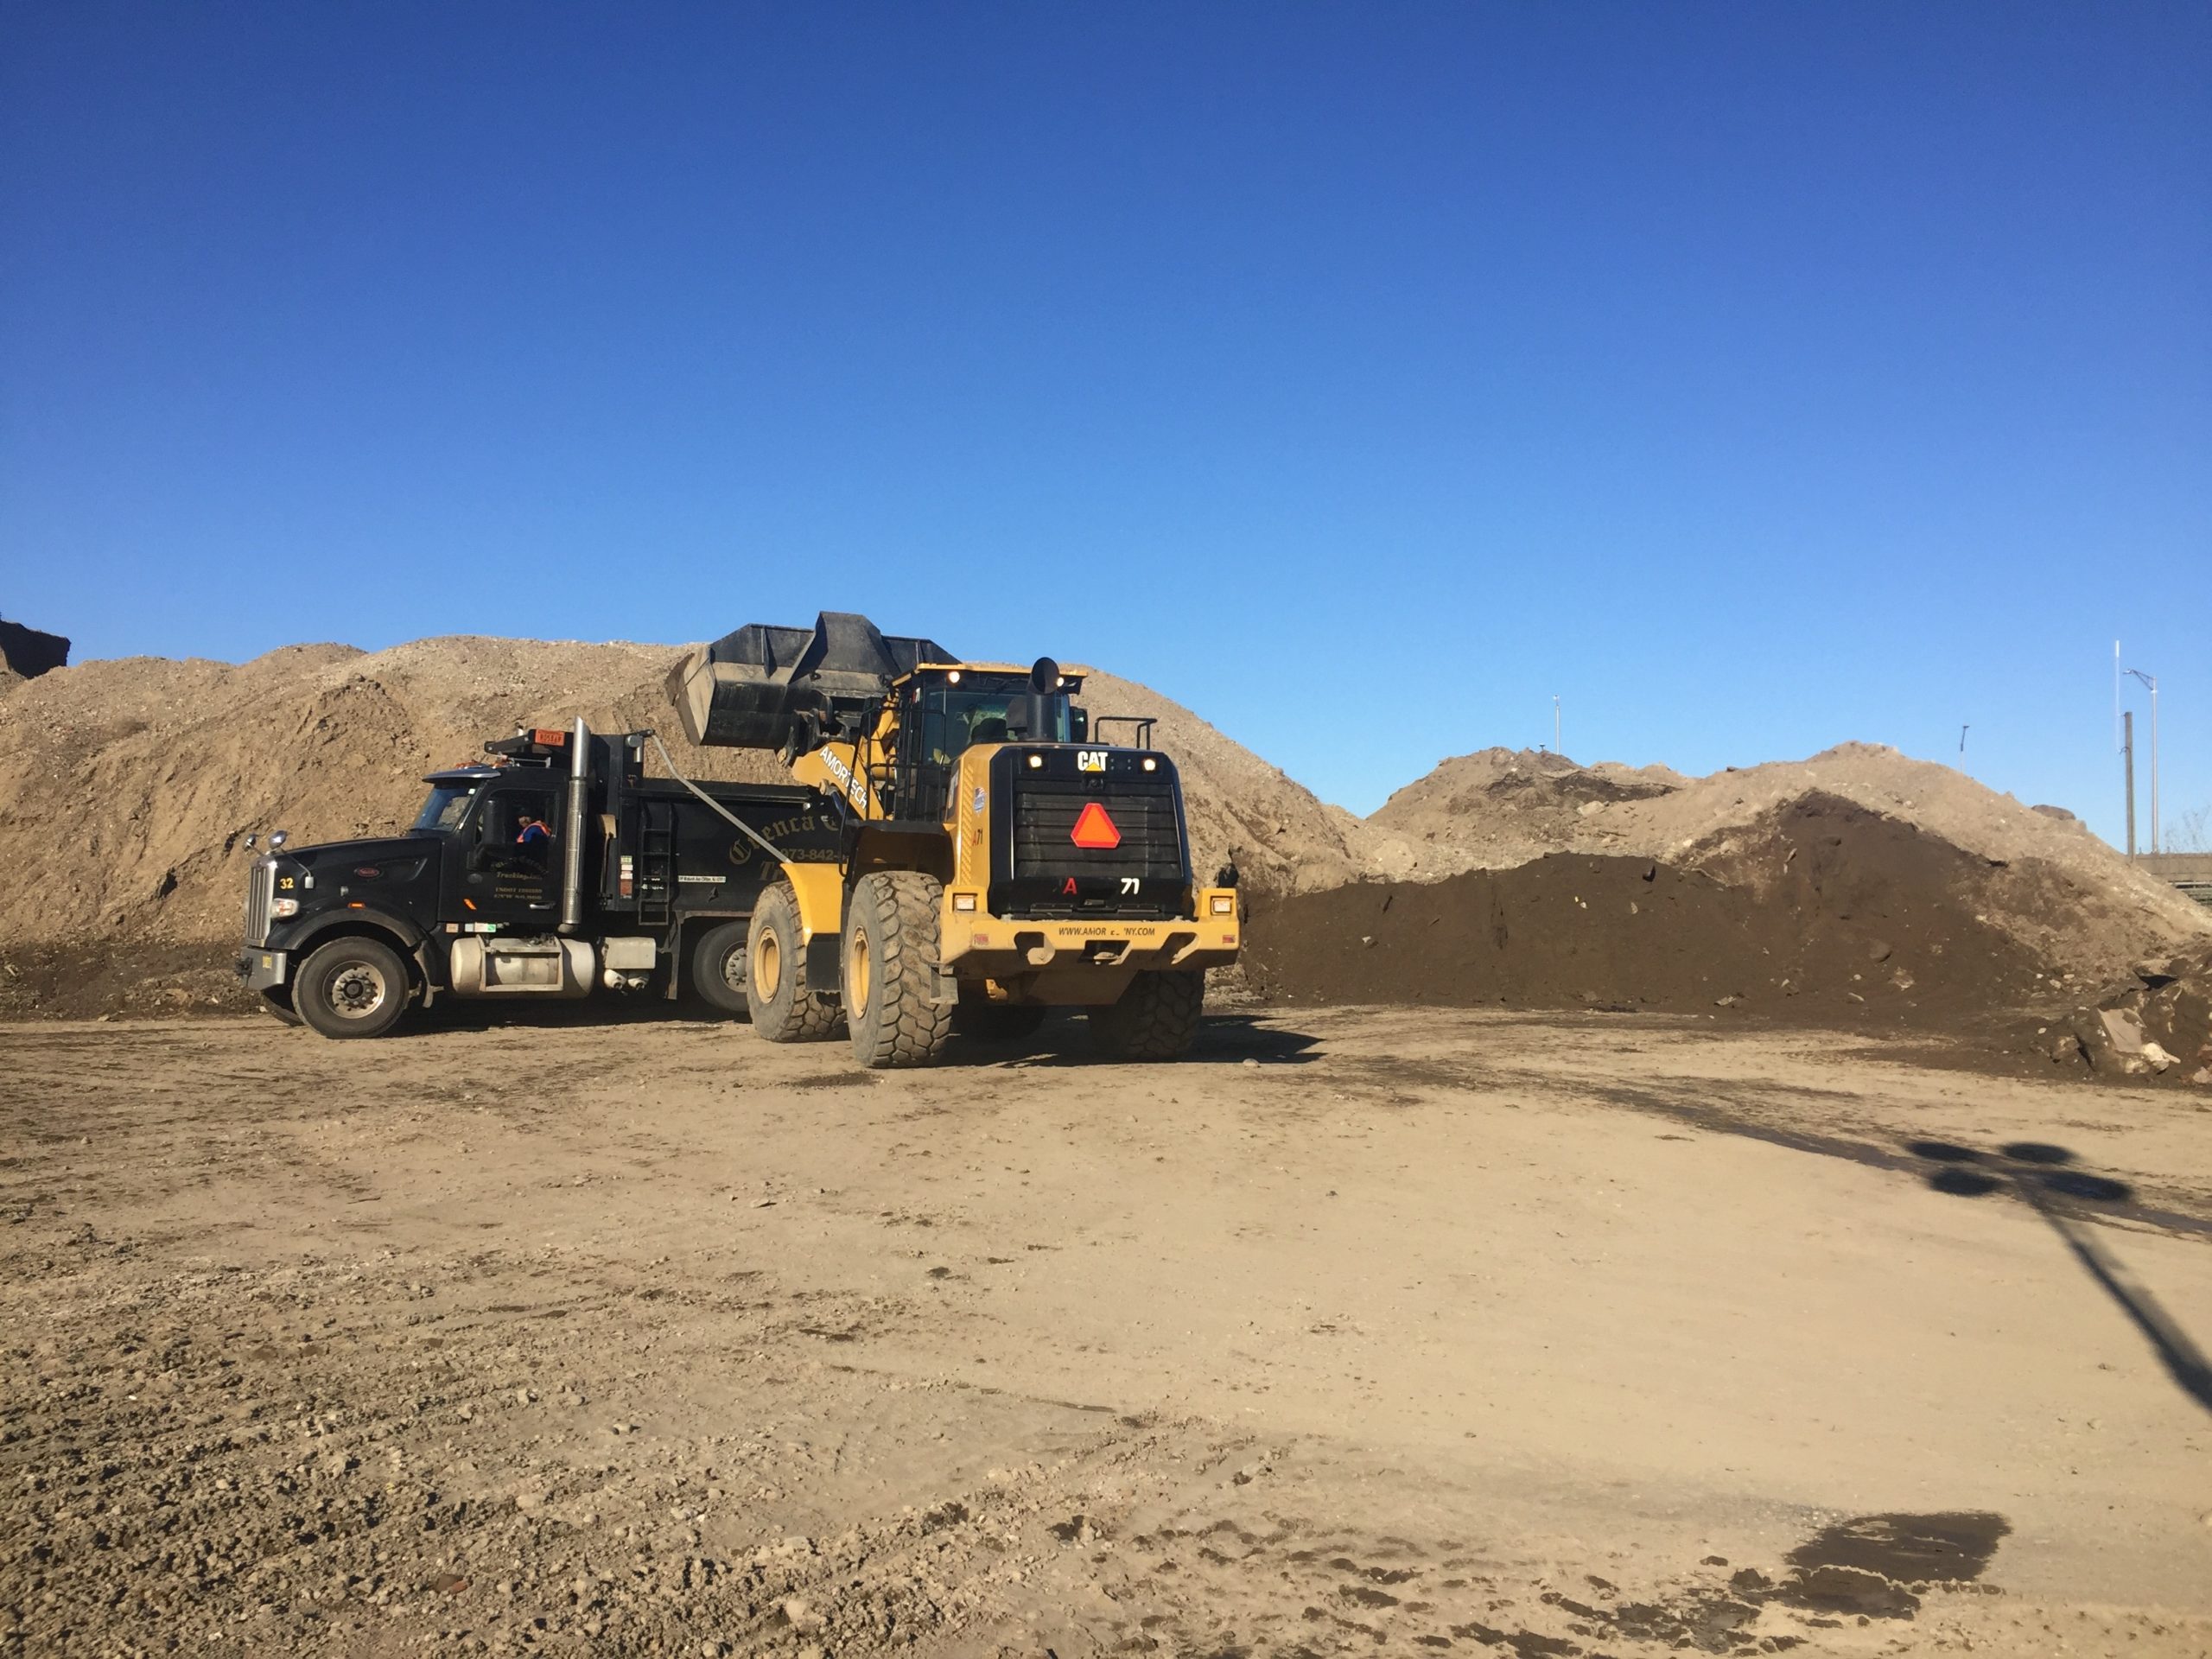 Excavator loading trucks with soil for disposal